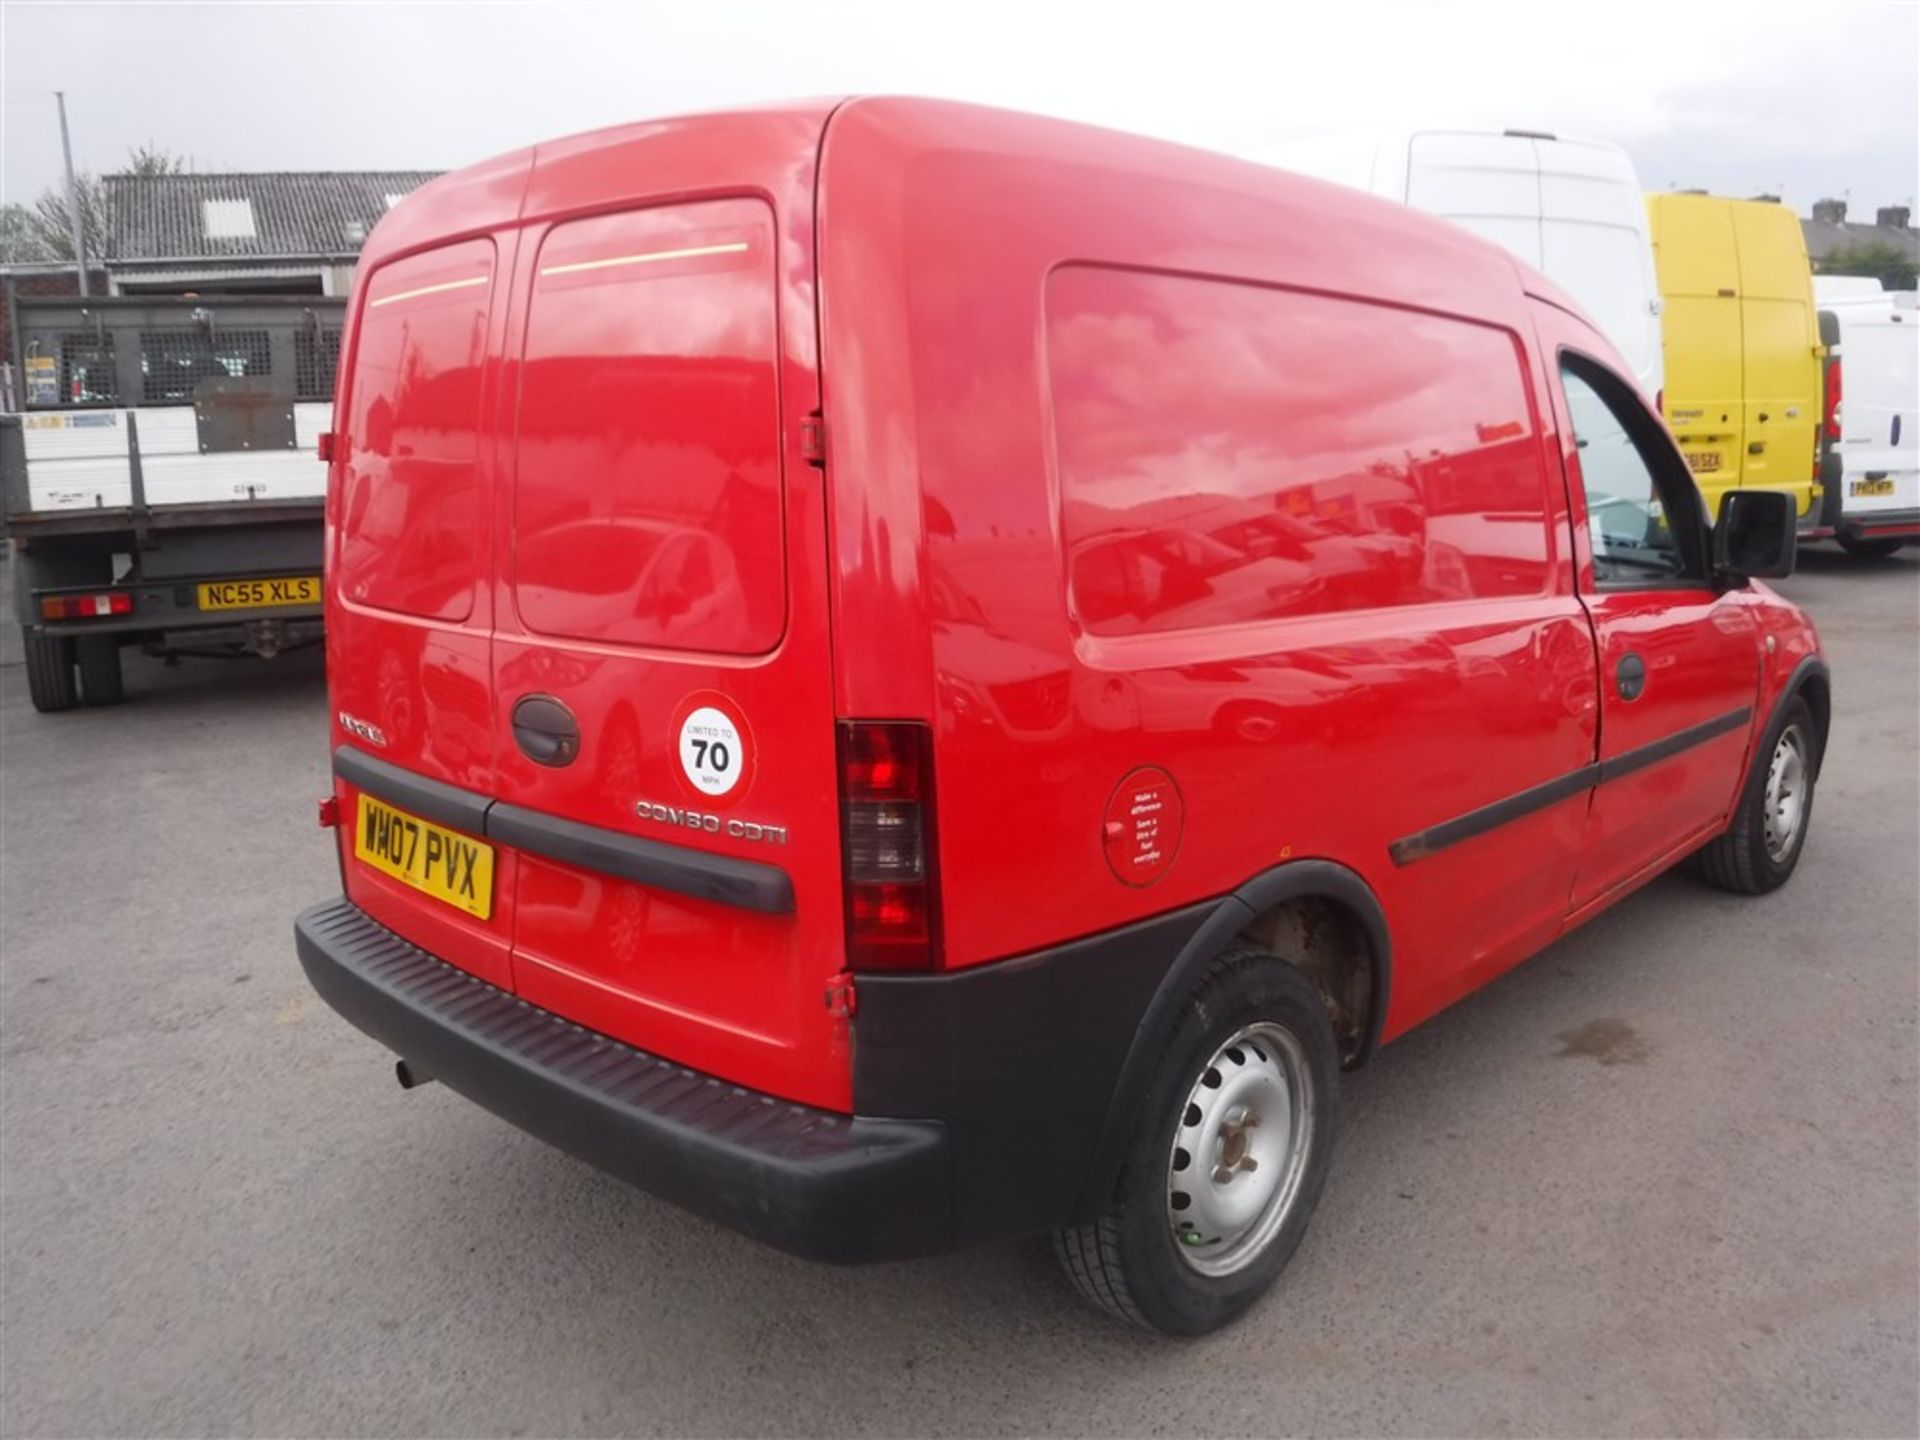 07 reg VAUXHALL COMBO 1700 CDTI, 1ST REG 08/07, TEST 04/18, 136539M WARRANTED, V5 HERE, 1 OWNER FROM - Image 4 of 5